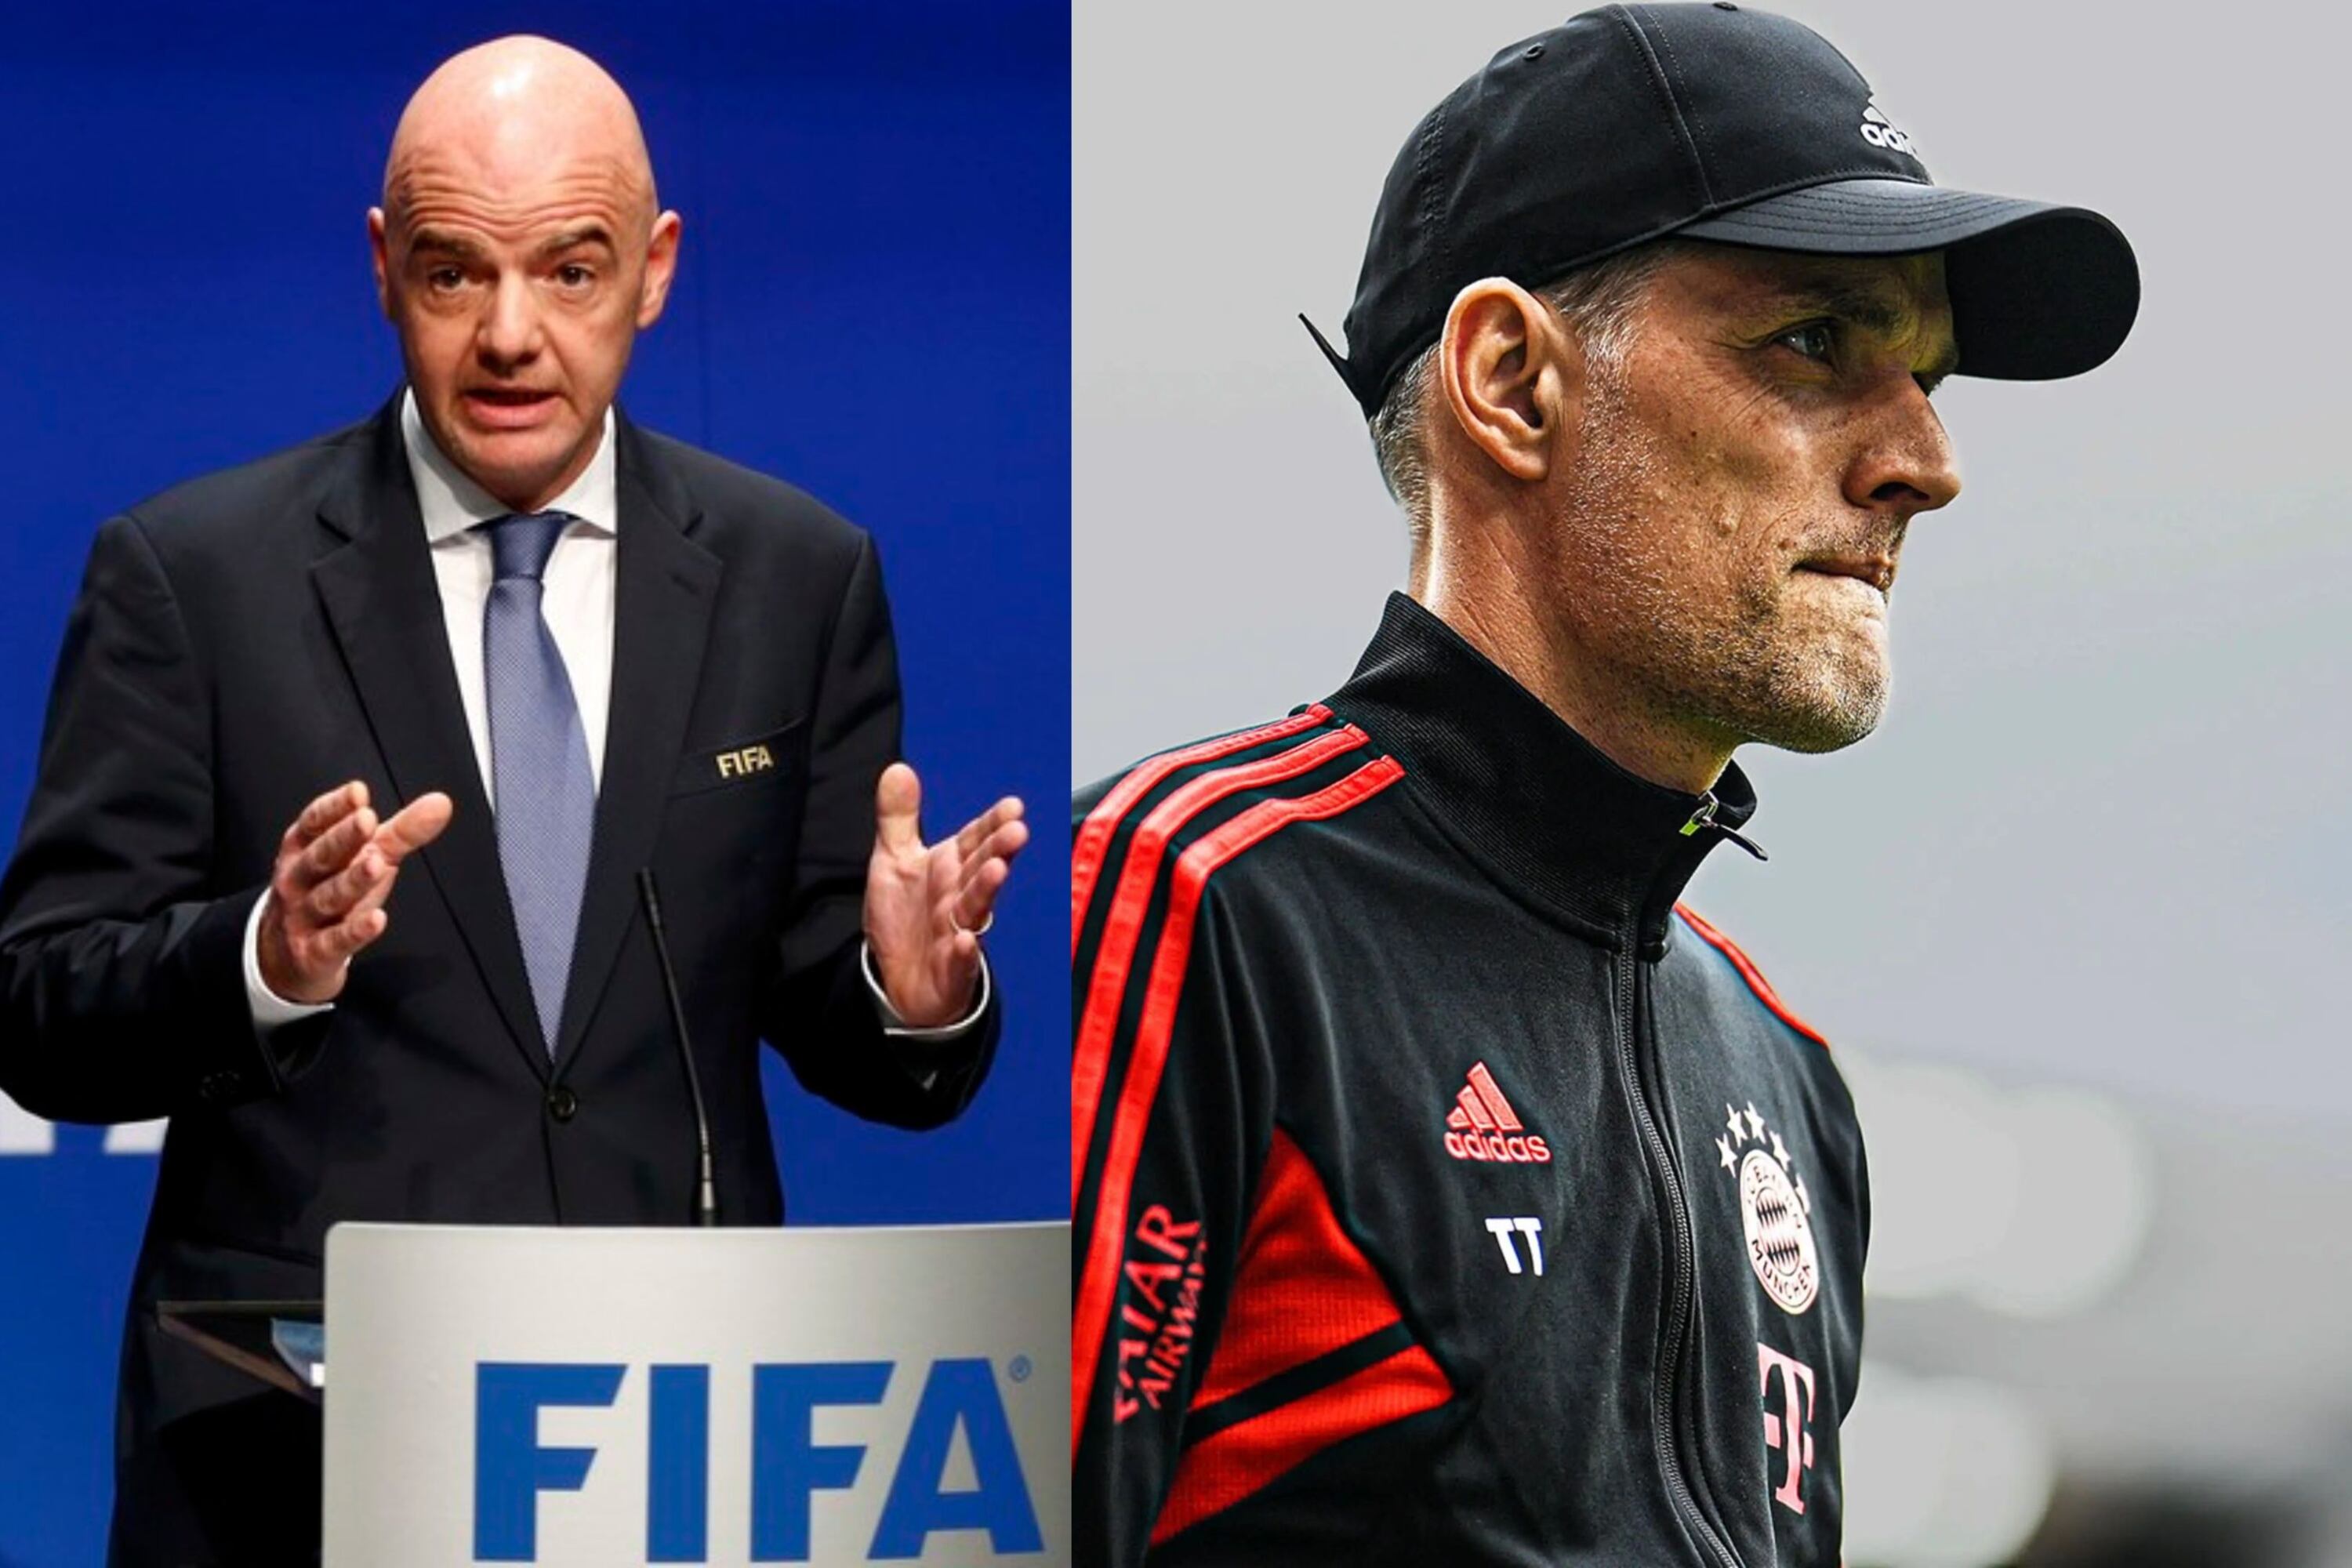 After the injuries at the FIFA International Break, Tuchel's harsh message to Infantino